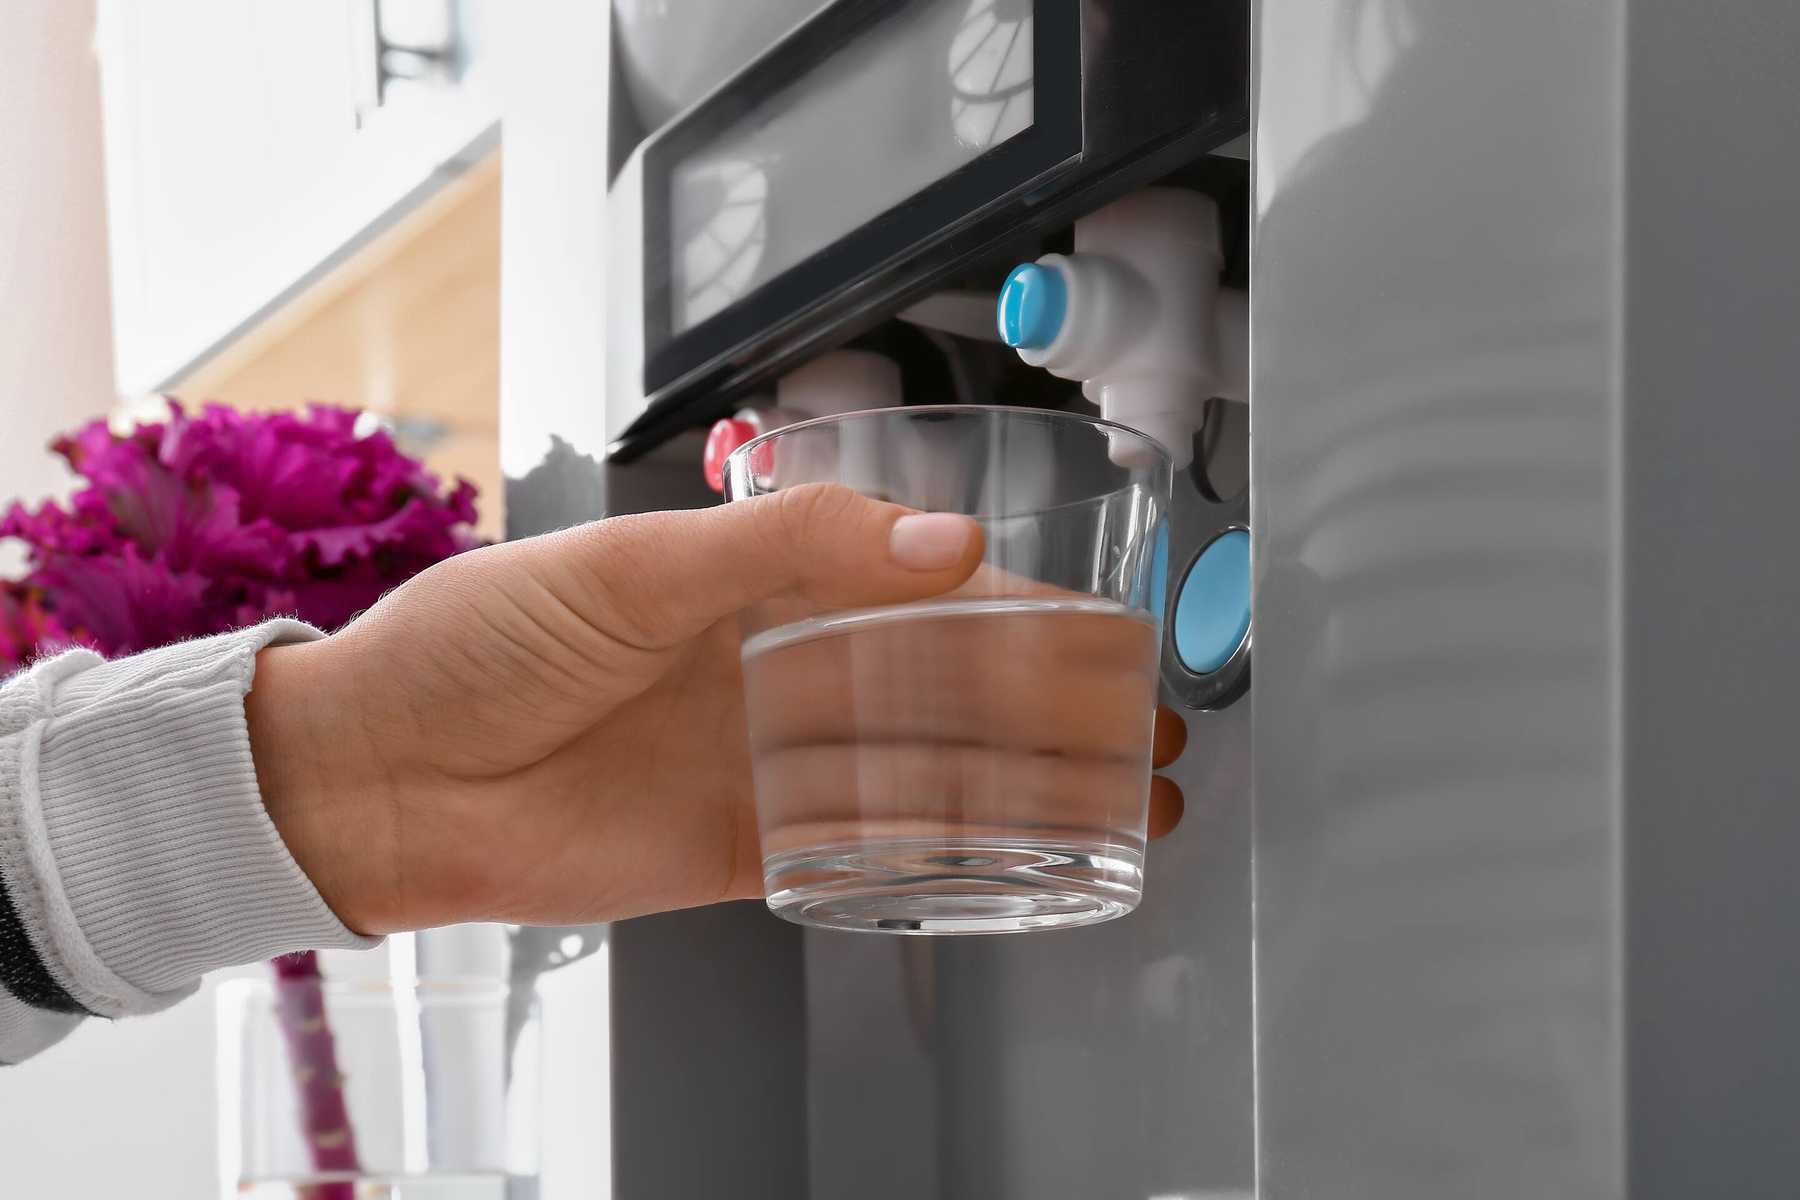 water purifiers: Five reasons why you should have a RO water